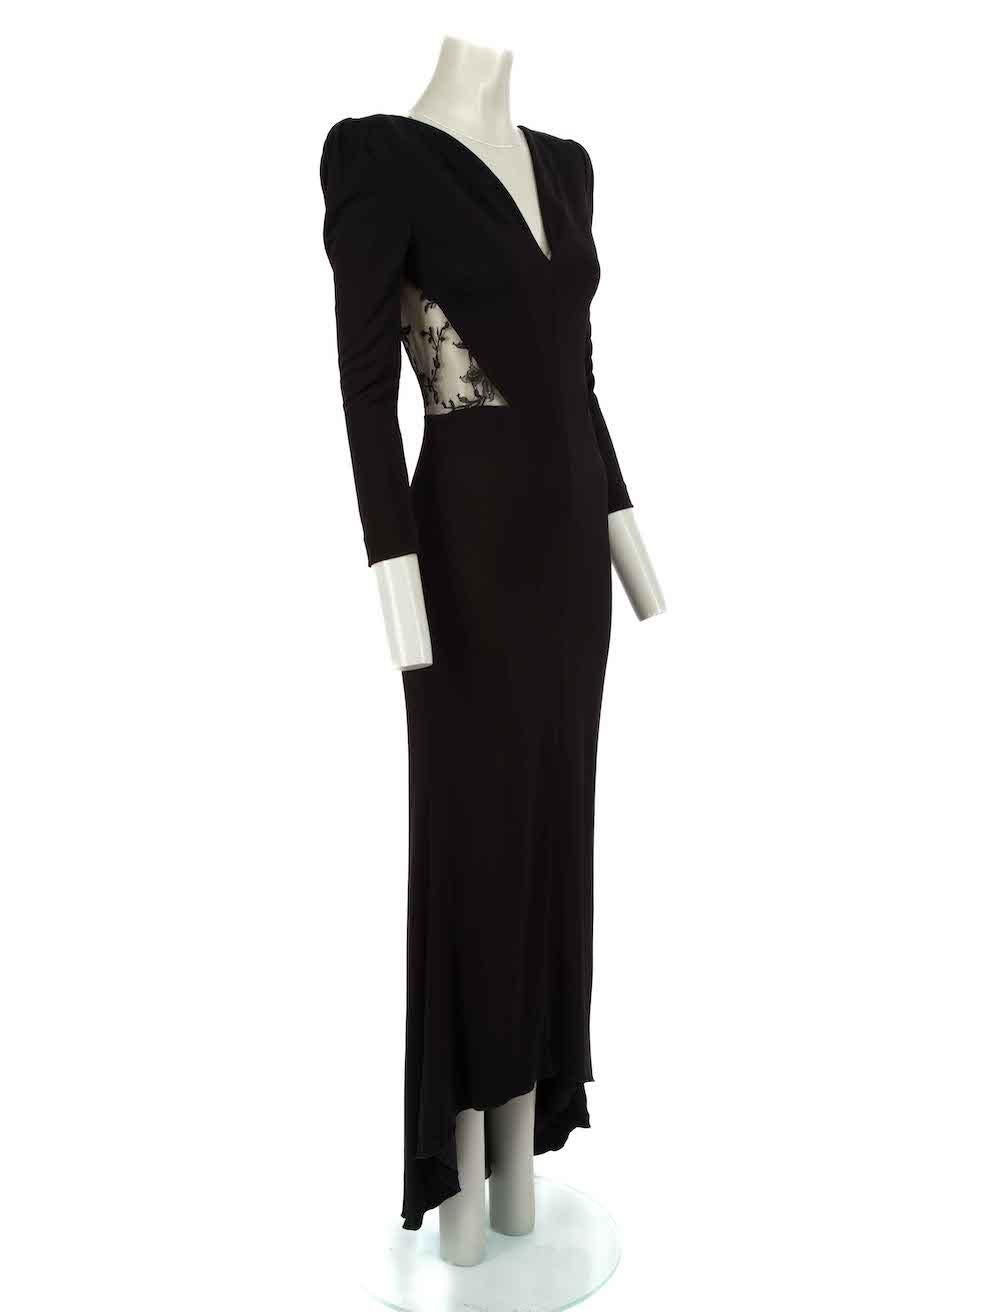 CONDITION is Good. Minor wear to dress is evident. Light wear on the right side with a rip on the tulle on this used Alexander McQueen designer resale item.
 
Details
Black
Viscose
Dress
Maxi
Plunge neck
Long sleeves
Sheer tulle and lace